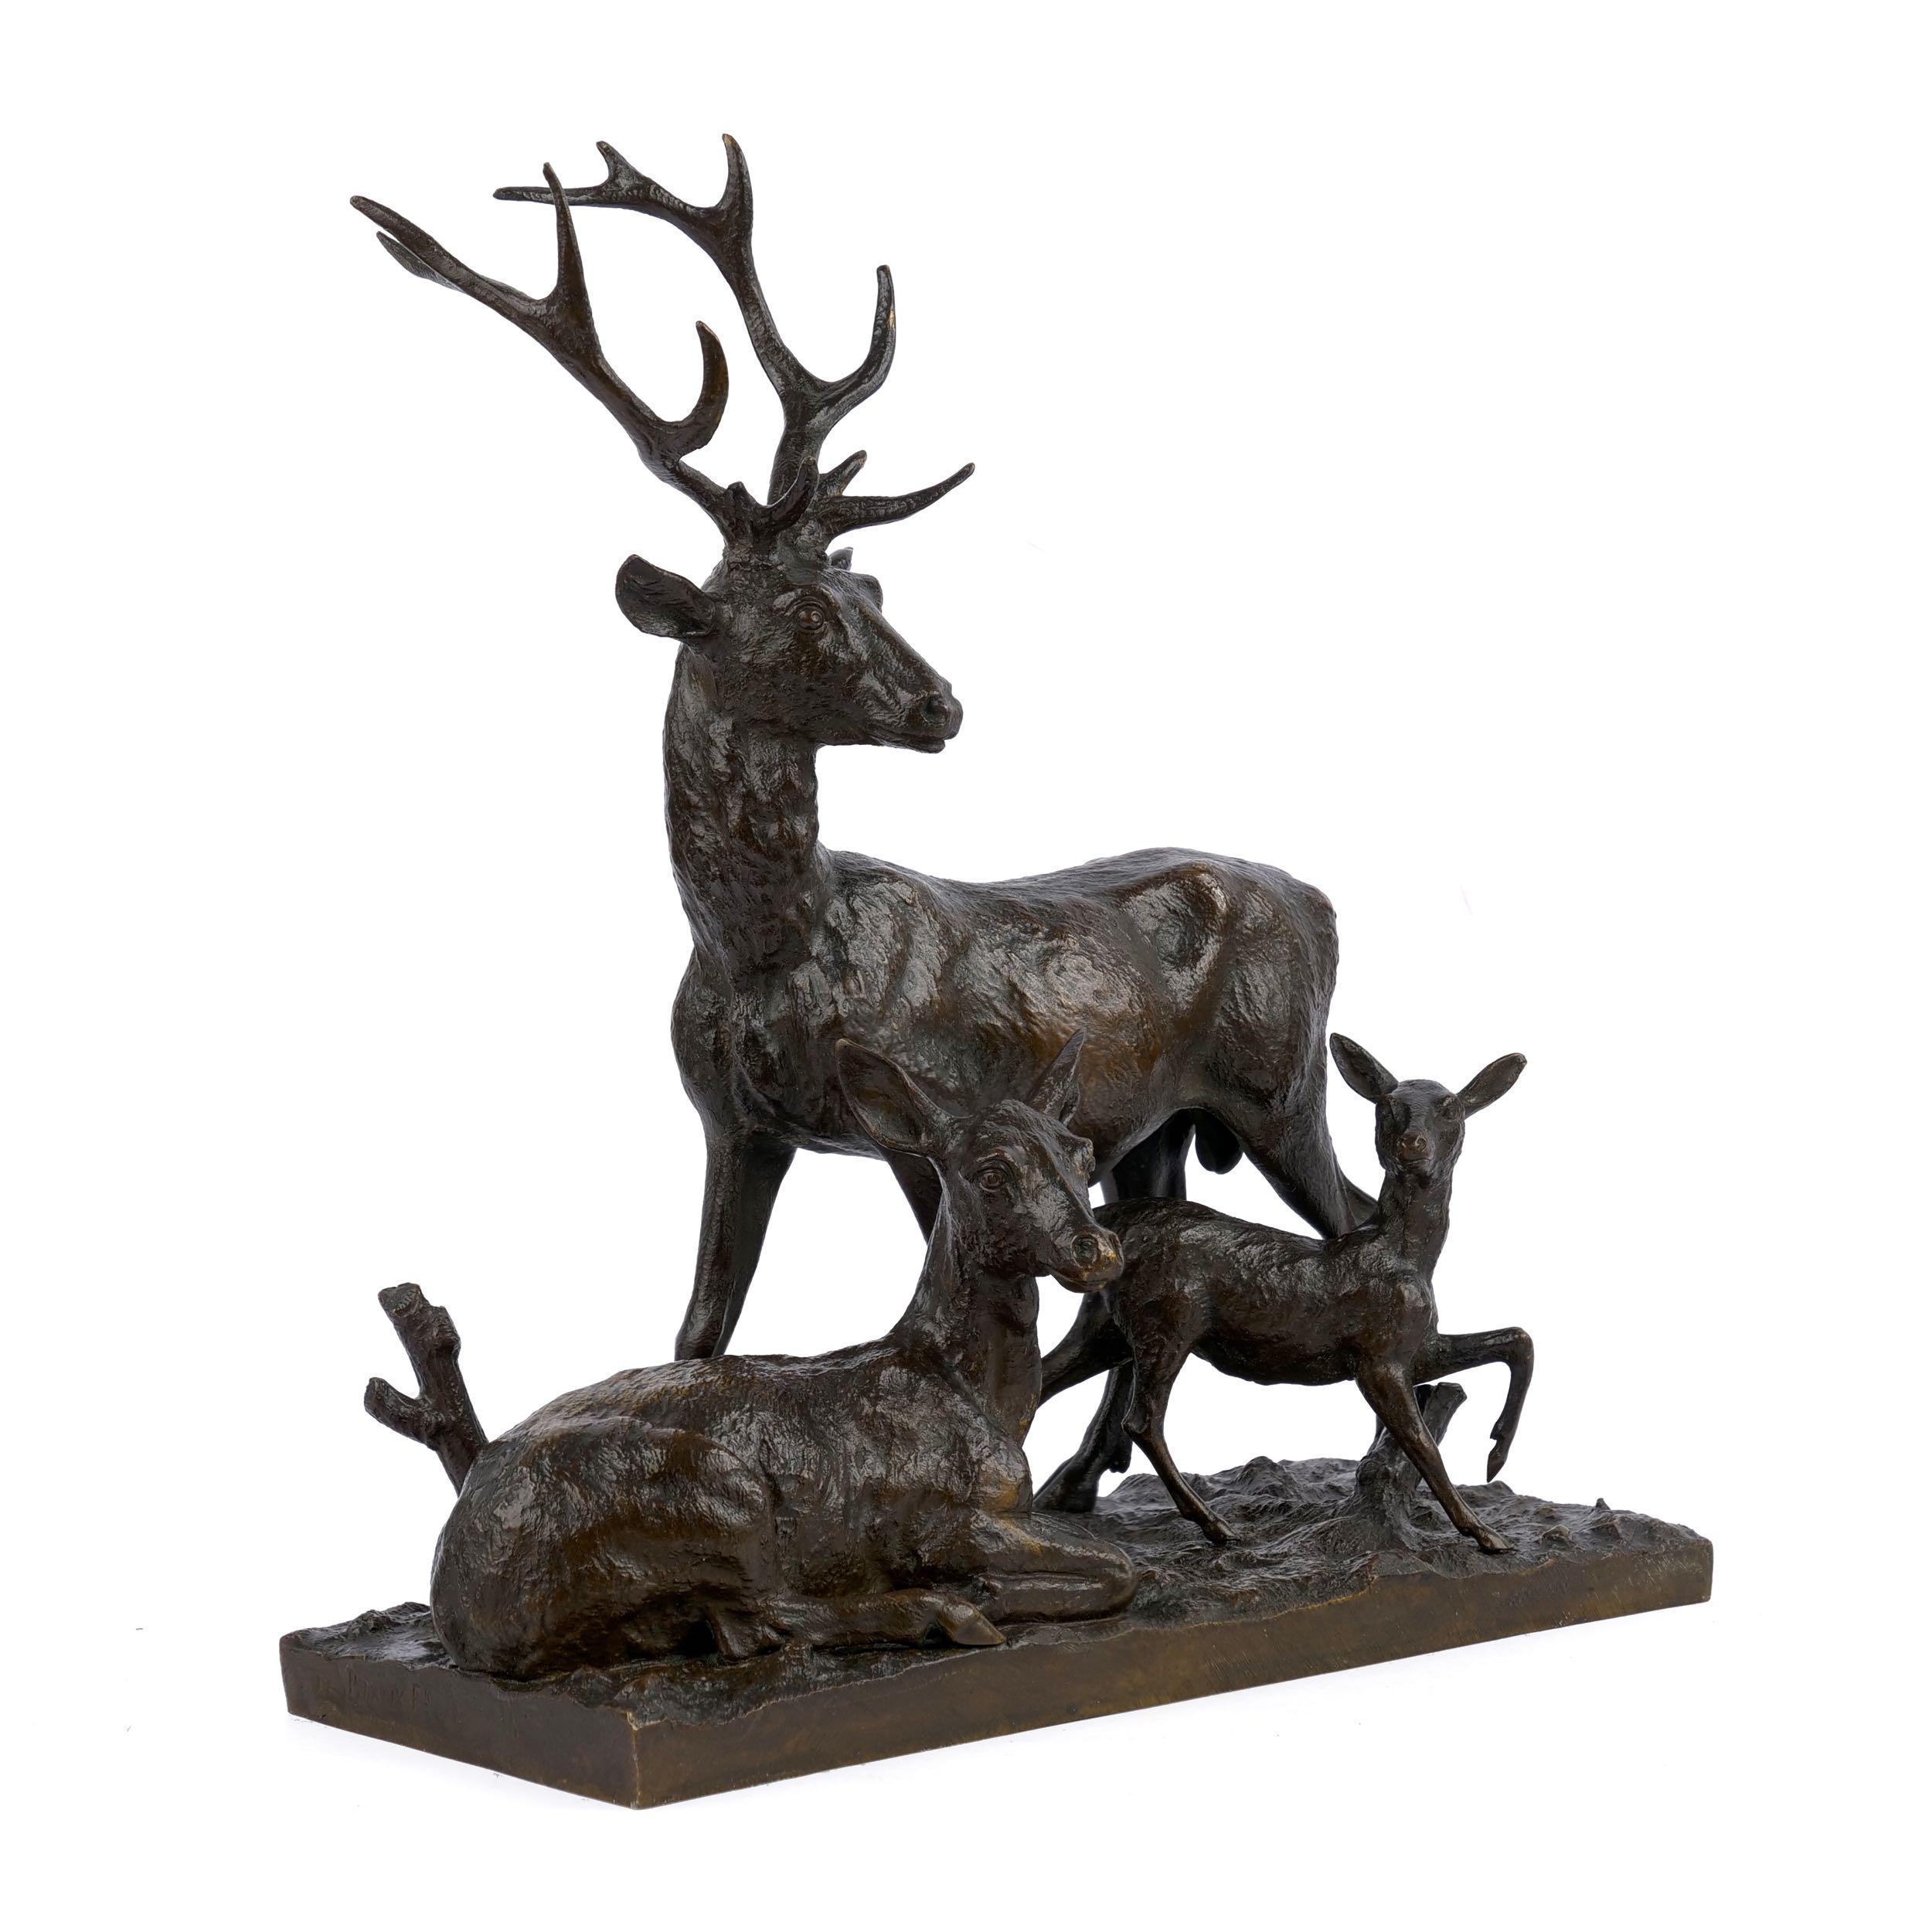 19th Century Bronze Sculpture Group “Family of Deer” by Christophe Fratin & Debraux Foundry